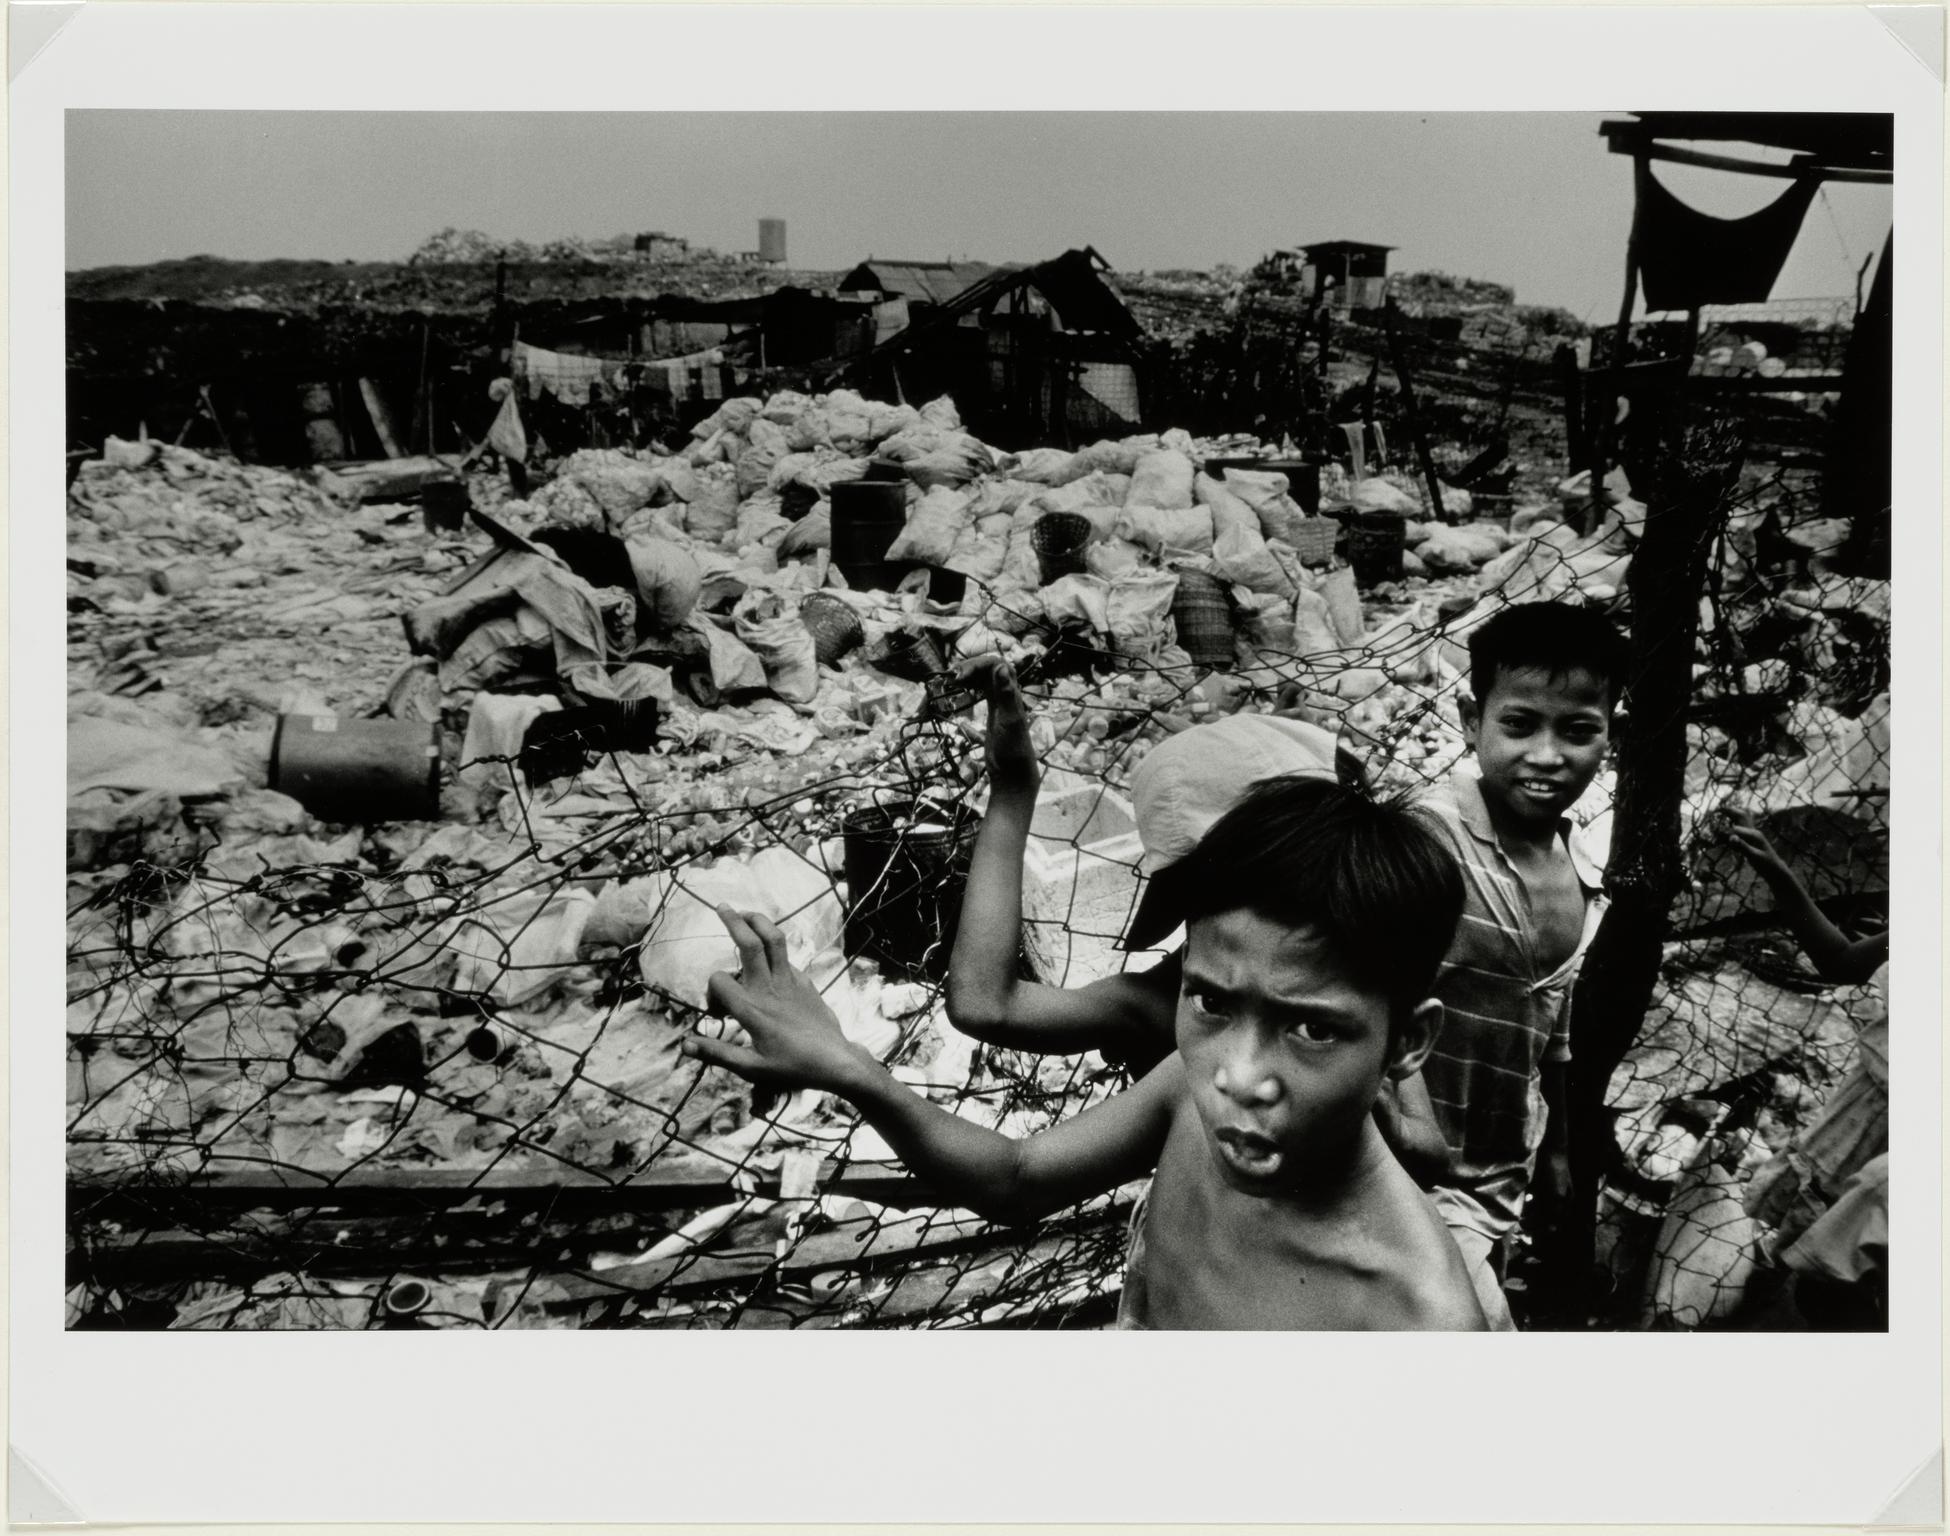 Philippines. 1996. Life in the Garbage Dump.